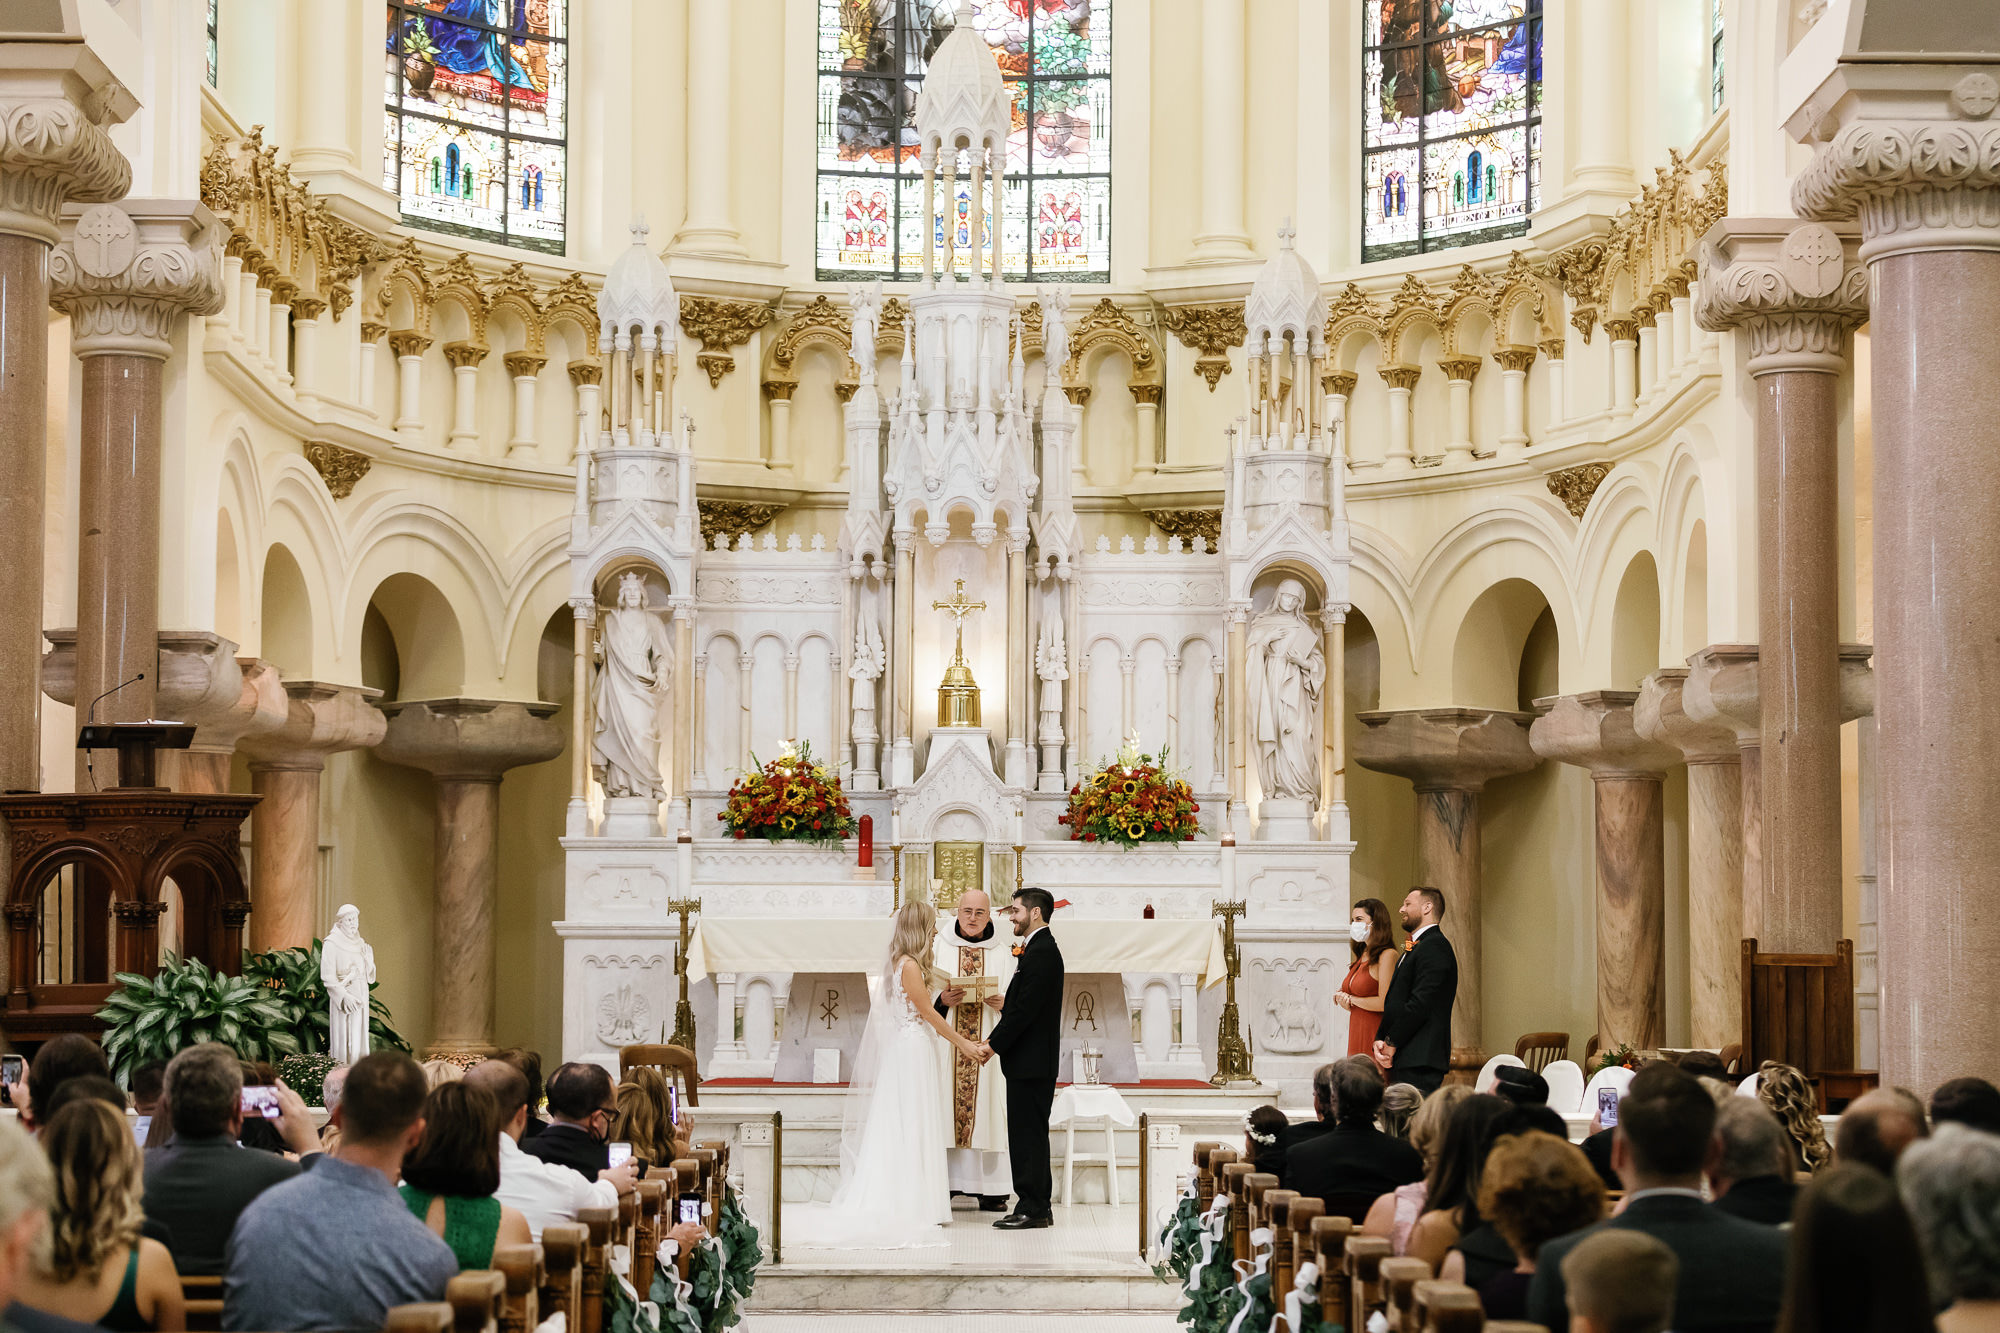 Bride and Groom Exchanging Wedding Vows, Tampa Bay Church Wedding Ceremony Venue Sacred Heart